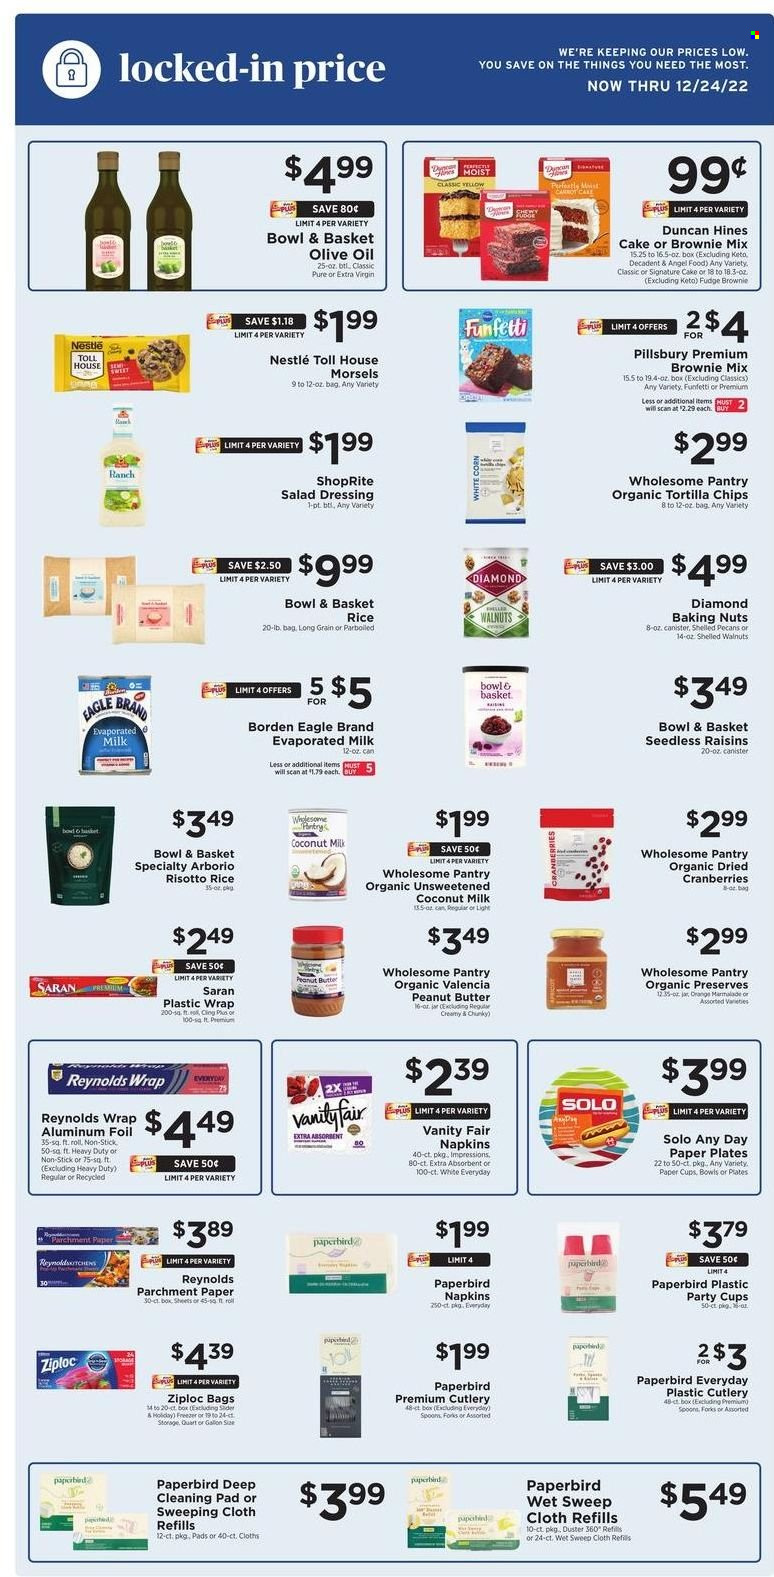 thumbnail - ShopRite Flyer - 12/04/2022 - 12/10/2022 - Sales products - cake, Bowl & Basket, Angel Food, brownie mix, oranges, Pillsbury, evaporated milk, organic unsweetened coconut milk, fudge, Nestlé, tortilla chips, chips, coconut milk, cranberries, rice, salad dressing, dressing, extra virgin olive oil, olive oil, peanut butter, raisins, walnuts, pecans, dried fruit, napkins, cleaning pad, Ziploc, duster, spoon, plate, cup, disposable cutlery, aluminium foil, jar, paper, paper plate, party cups. Page 12.